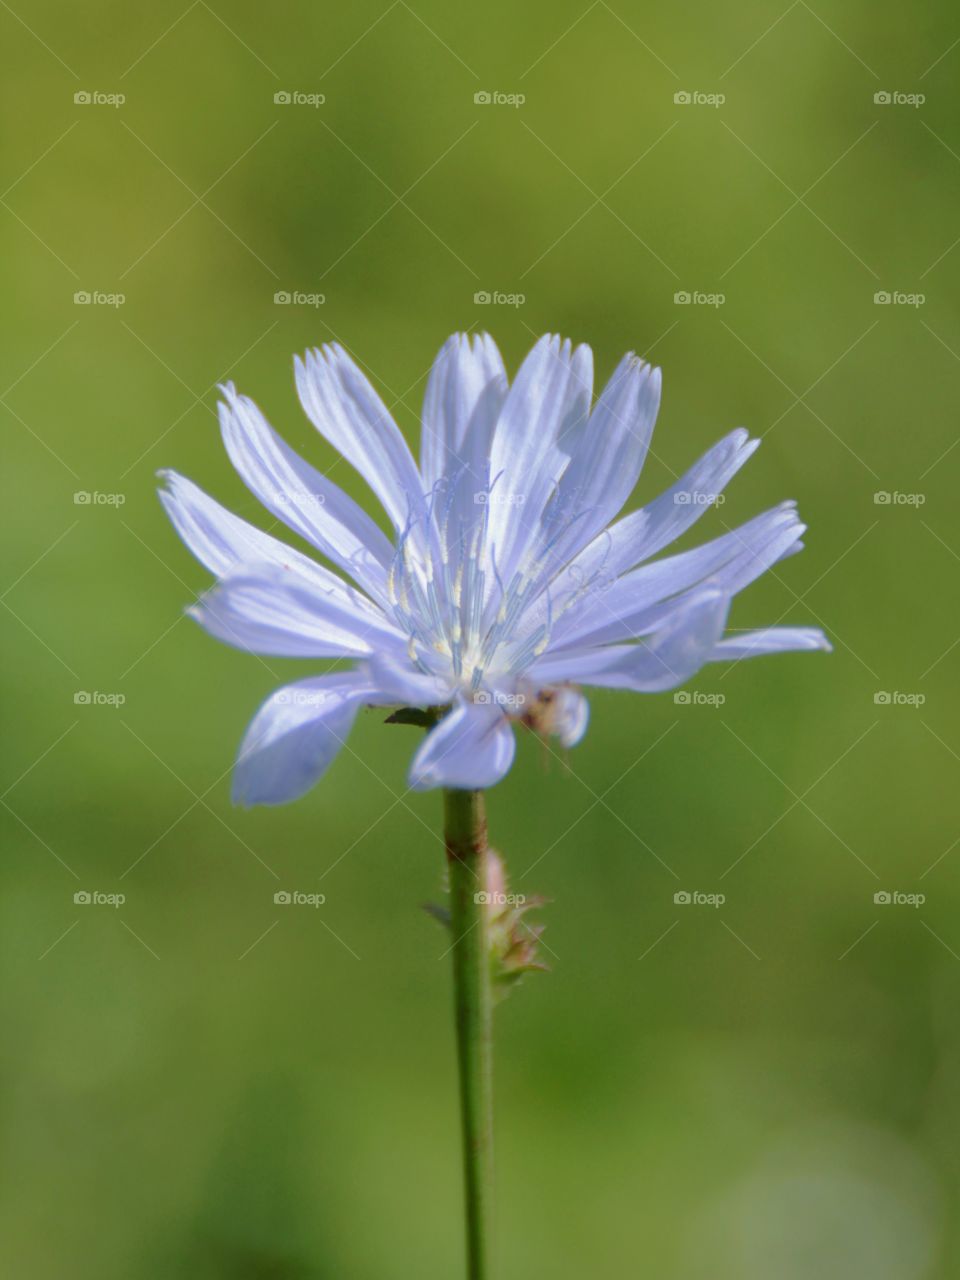 A purple flower on a green background